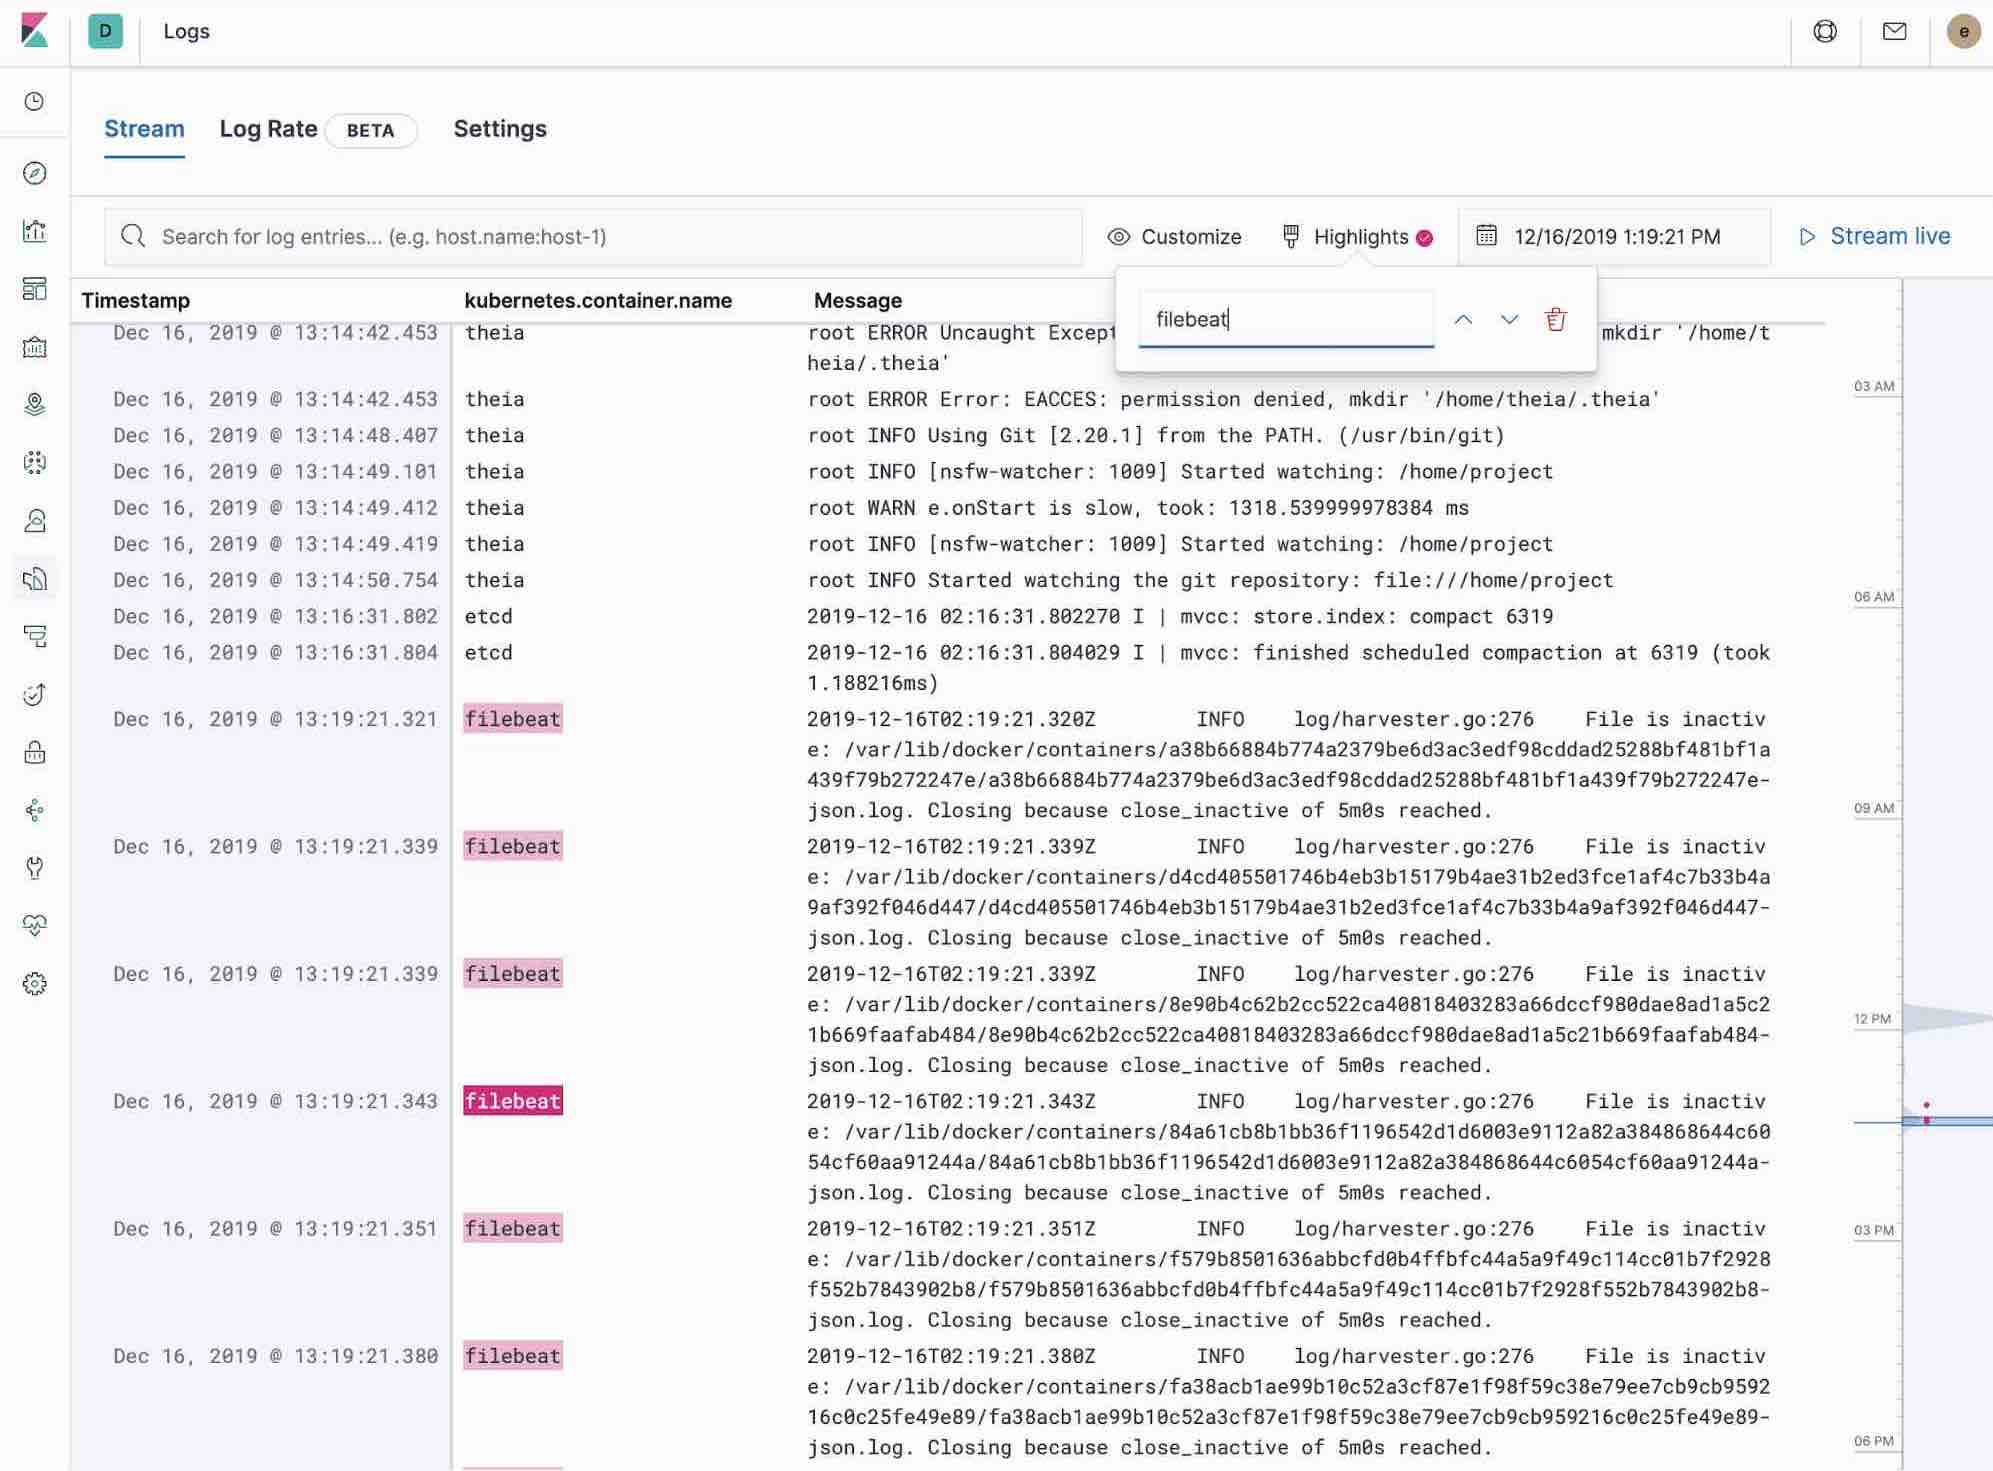 Searching for Filebeat entries in the Logs app in Kibana